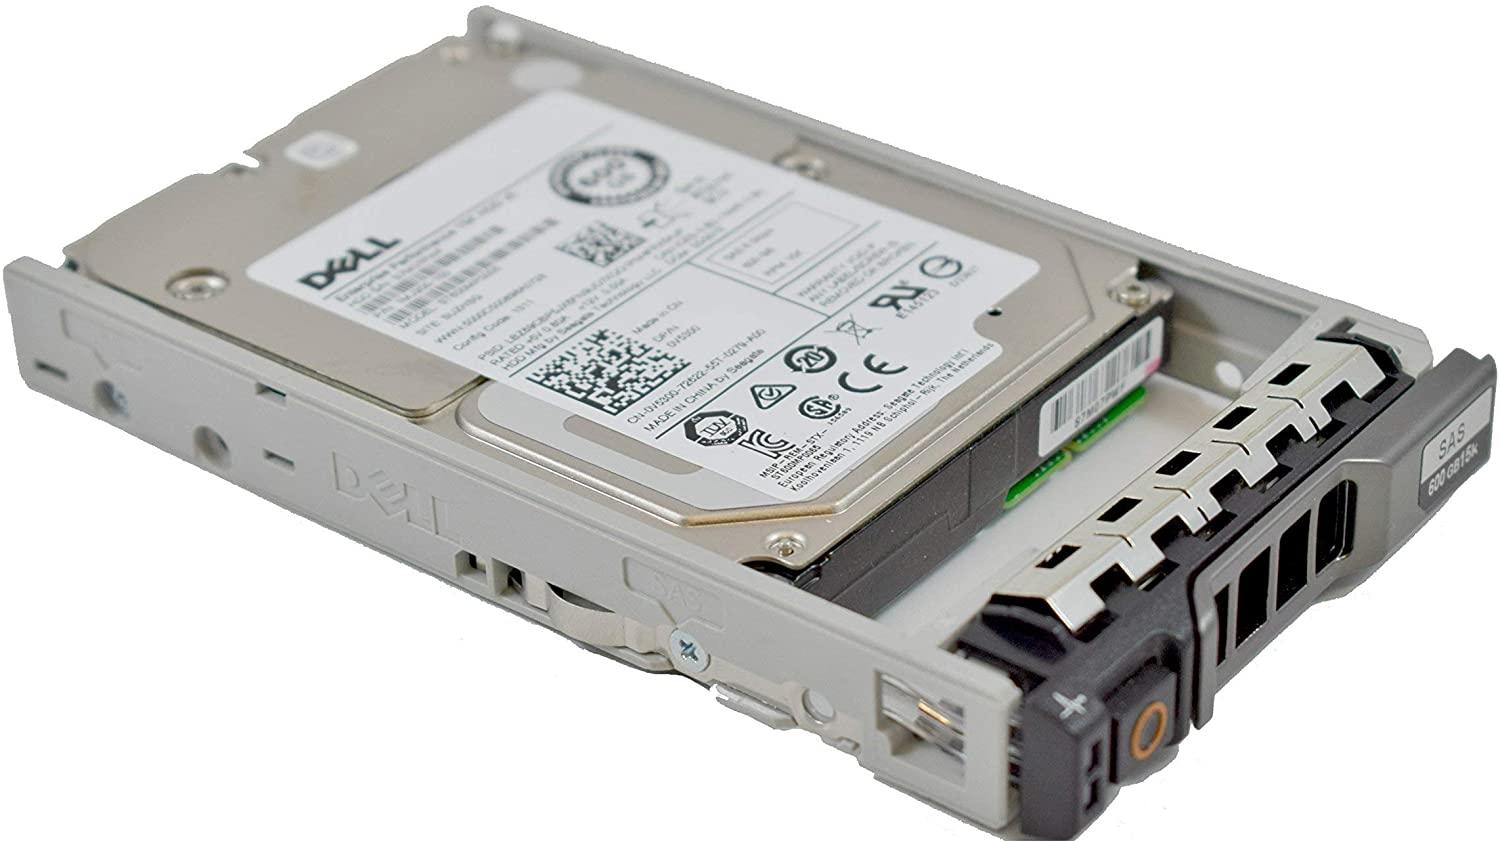 Dell 400-AGSP 600gb 15k rpm 2.5'' SAS 6Gbps Hard Drive